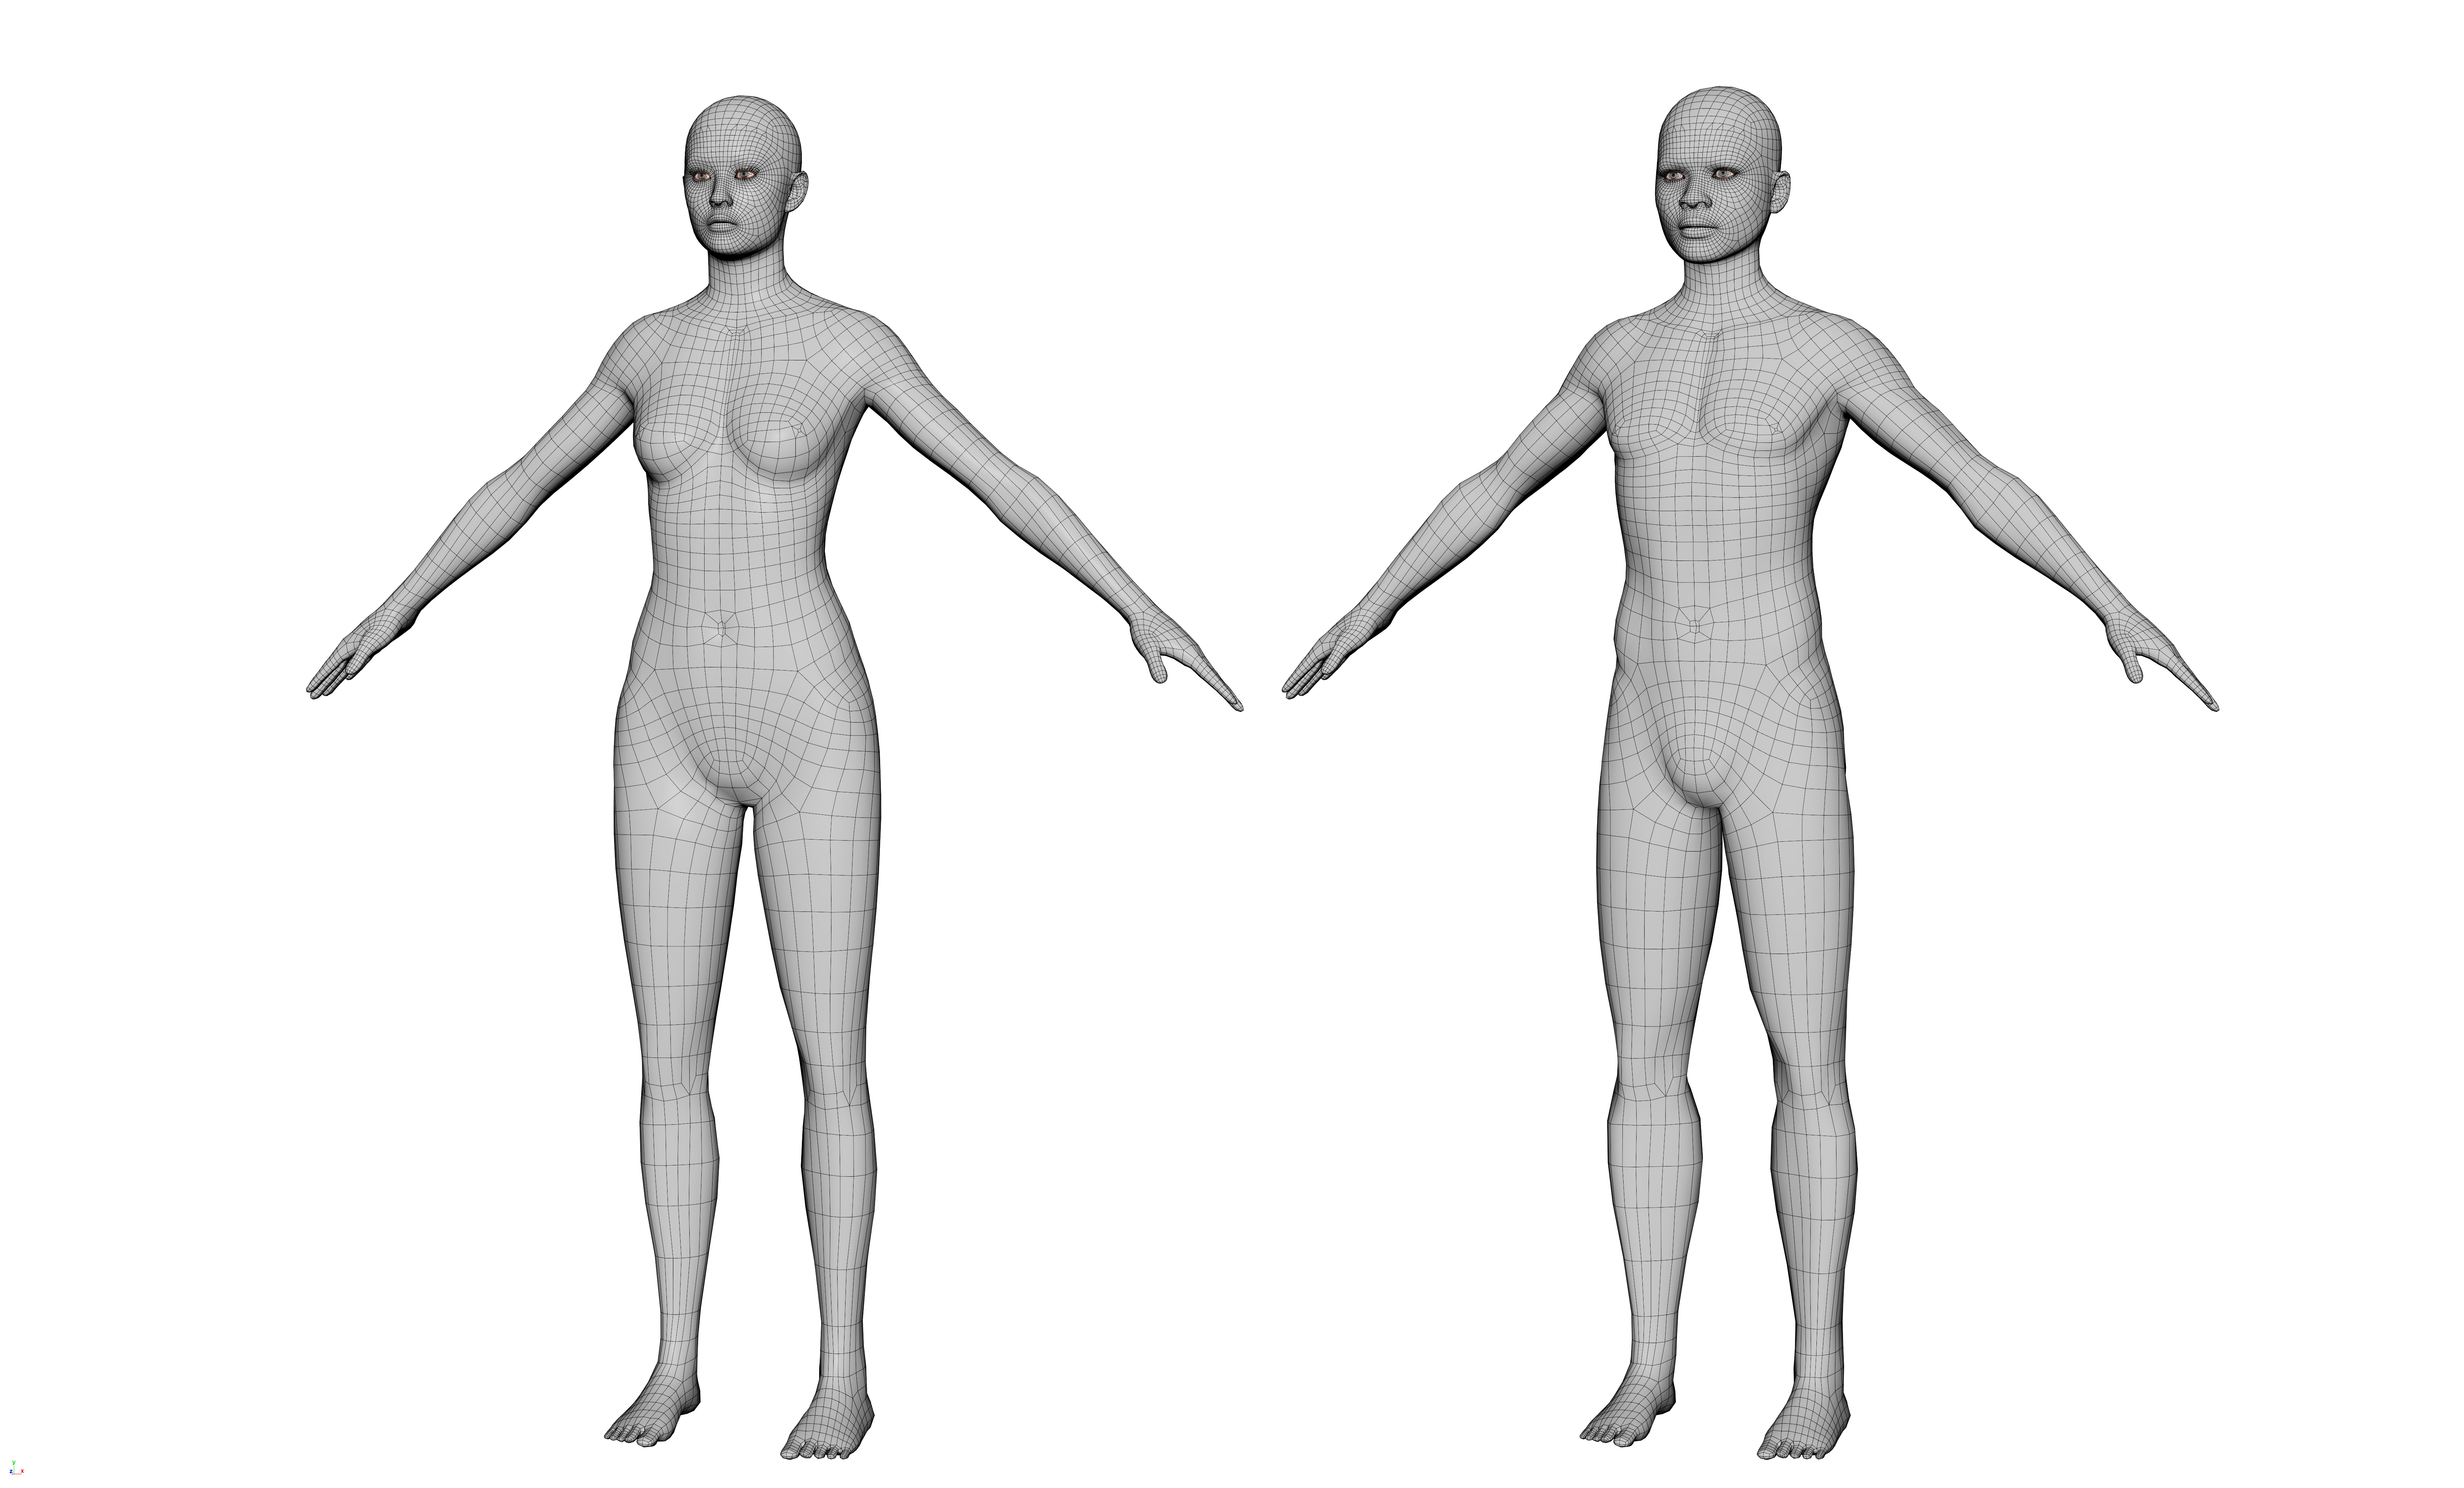 Shared Body topology which can blendshape between Male and Female